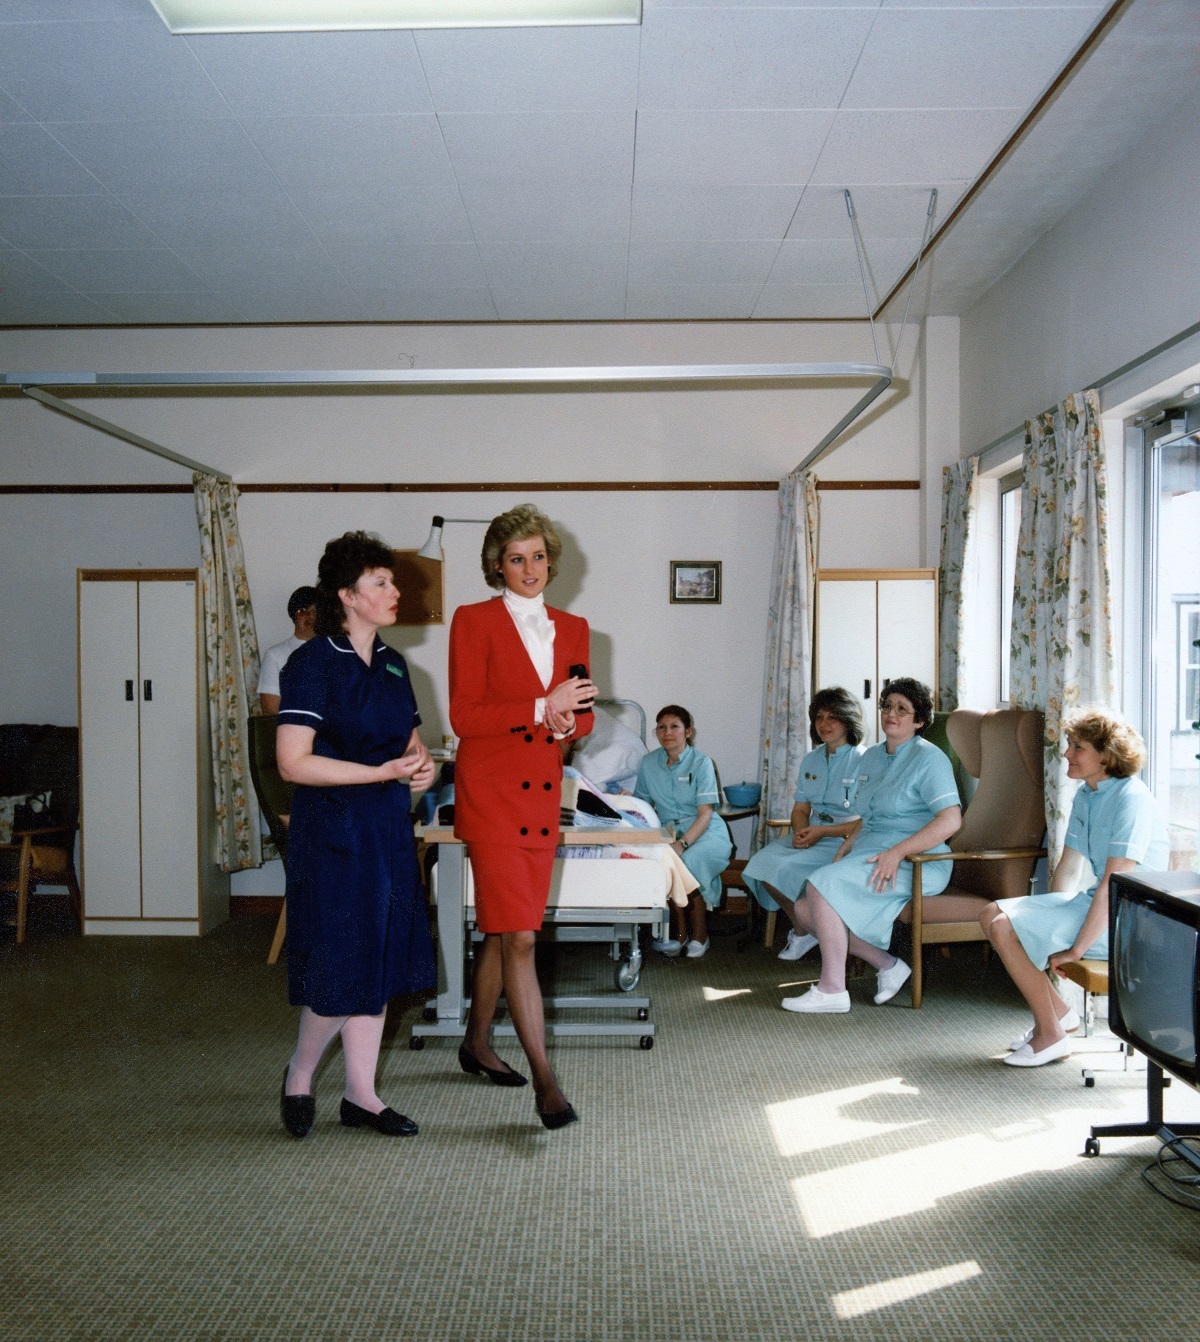 Touring the hospice inpatient unit - Princess Diana is shown around